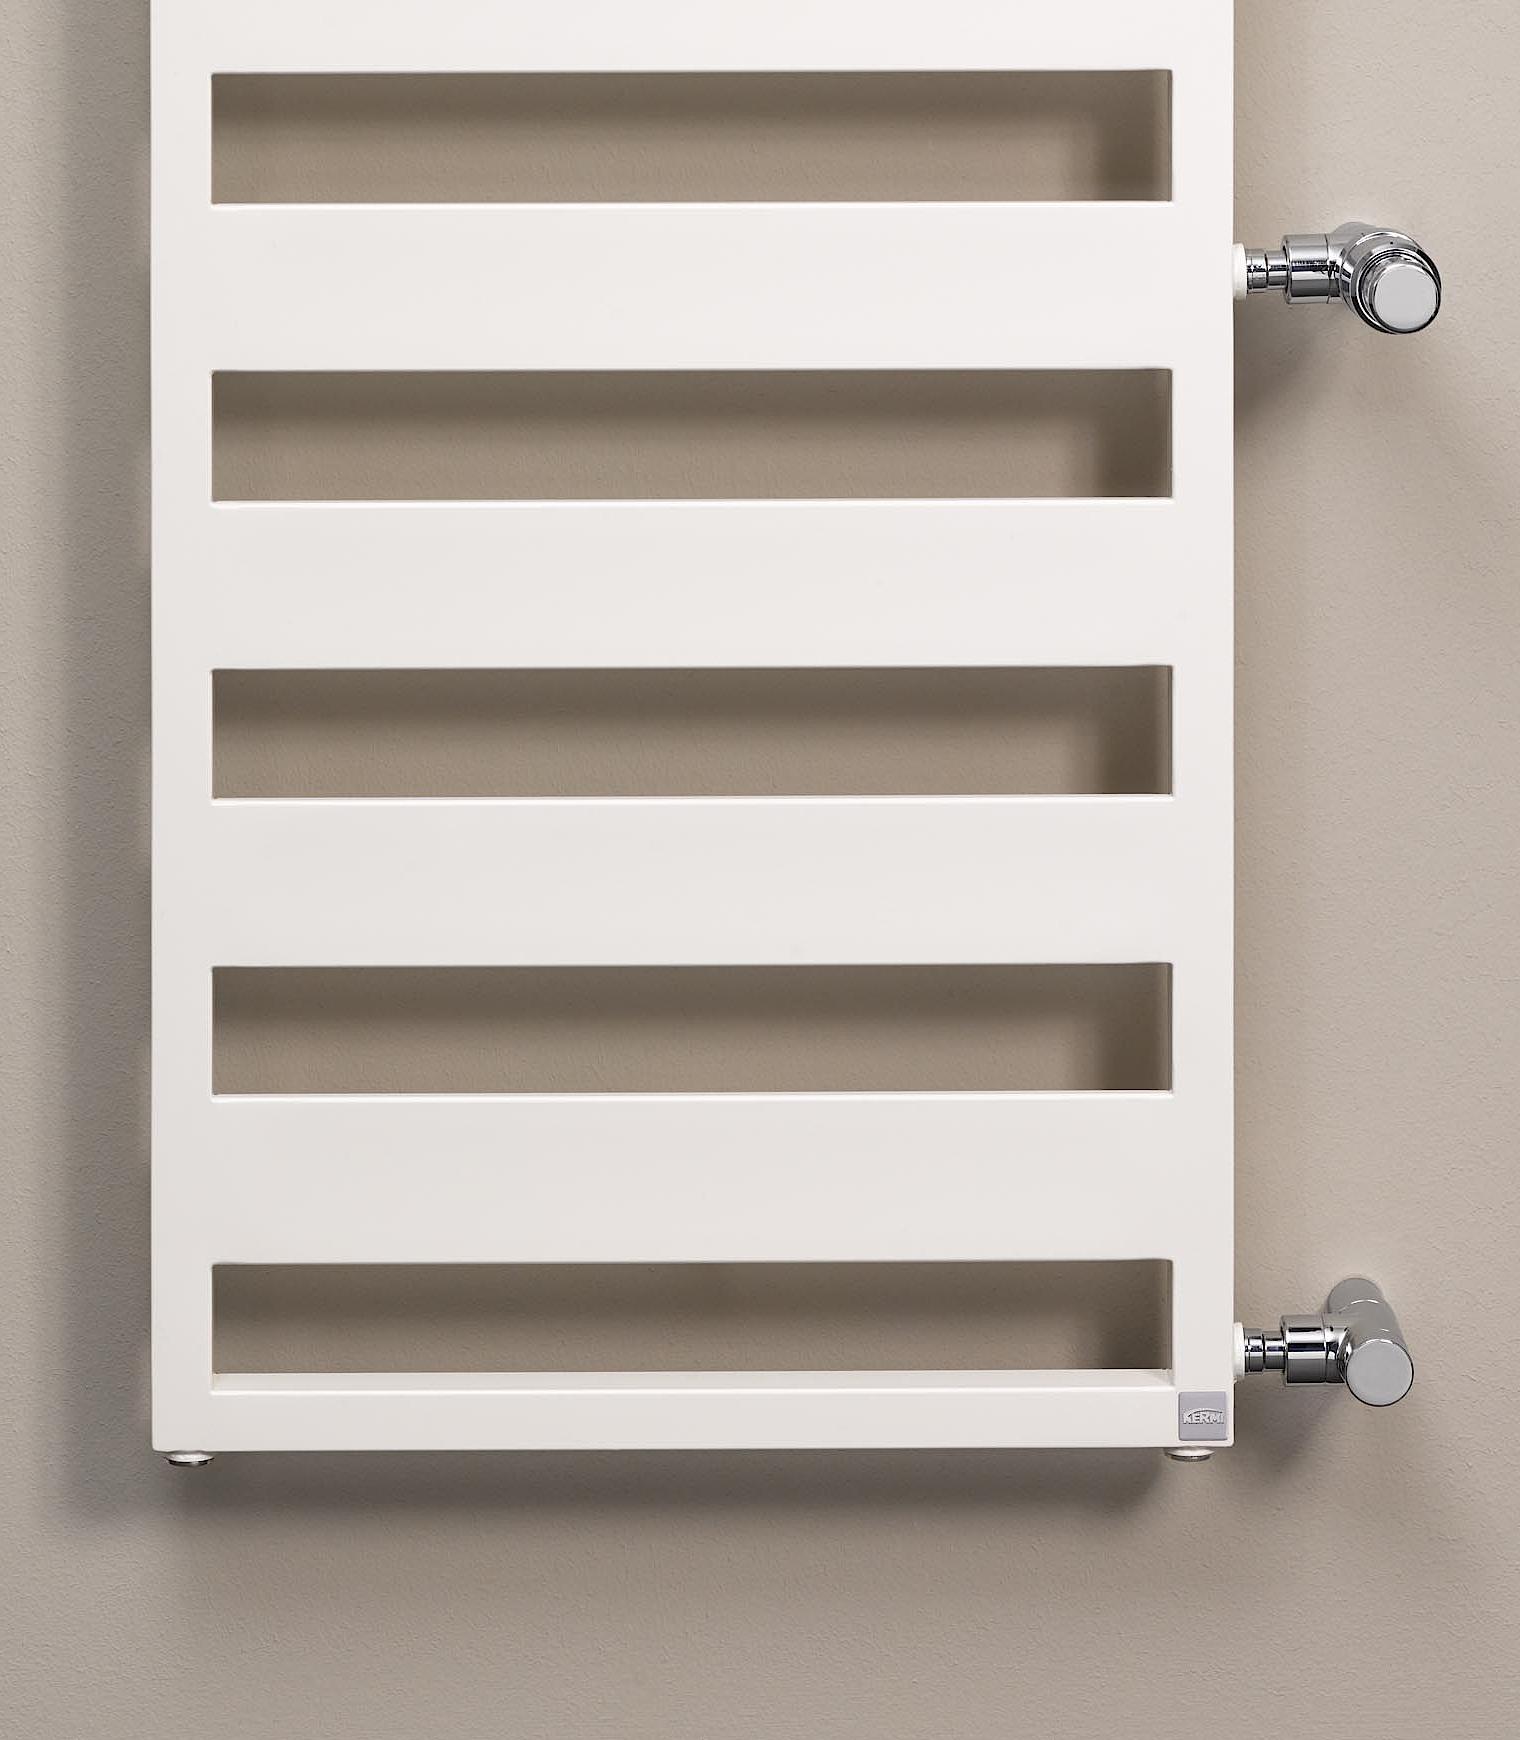 The Kermi Casteo designer and bathroom radiator offers a fast and efficient replacement solution for modernisation projects.